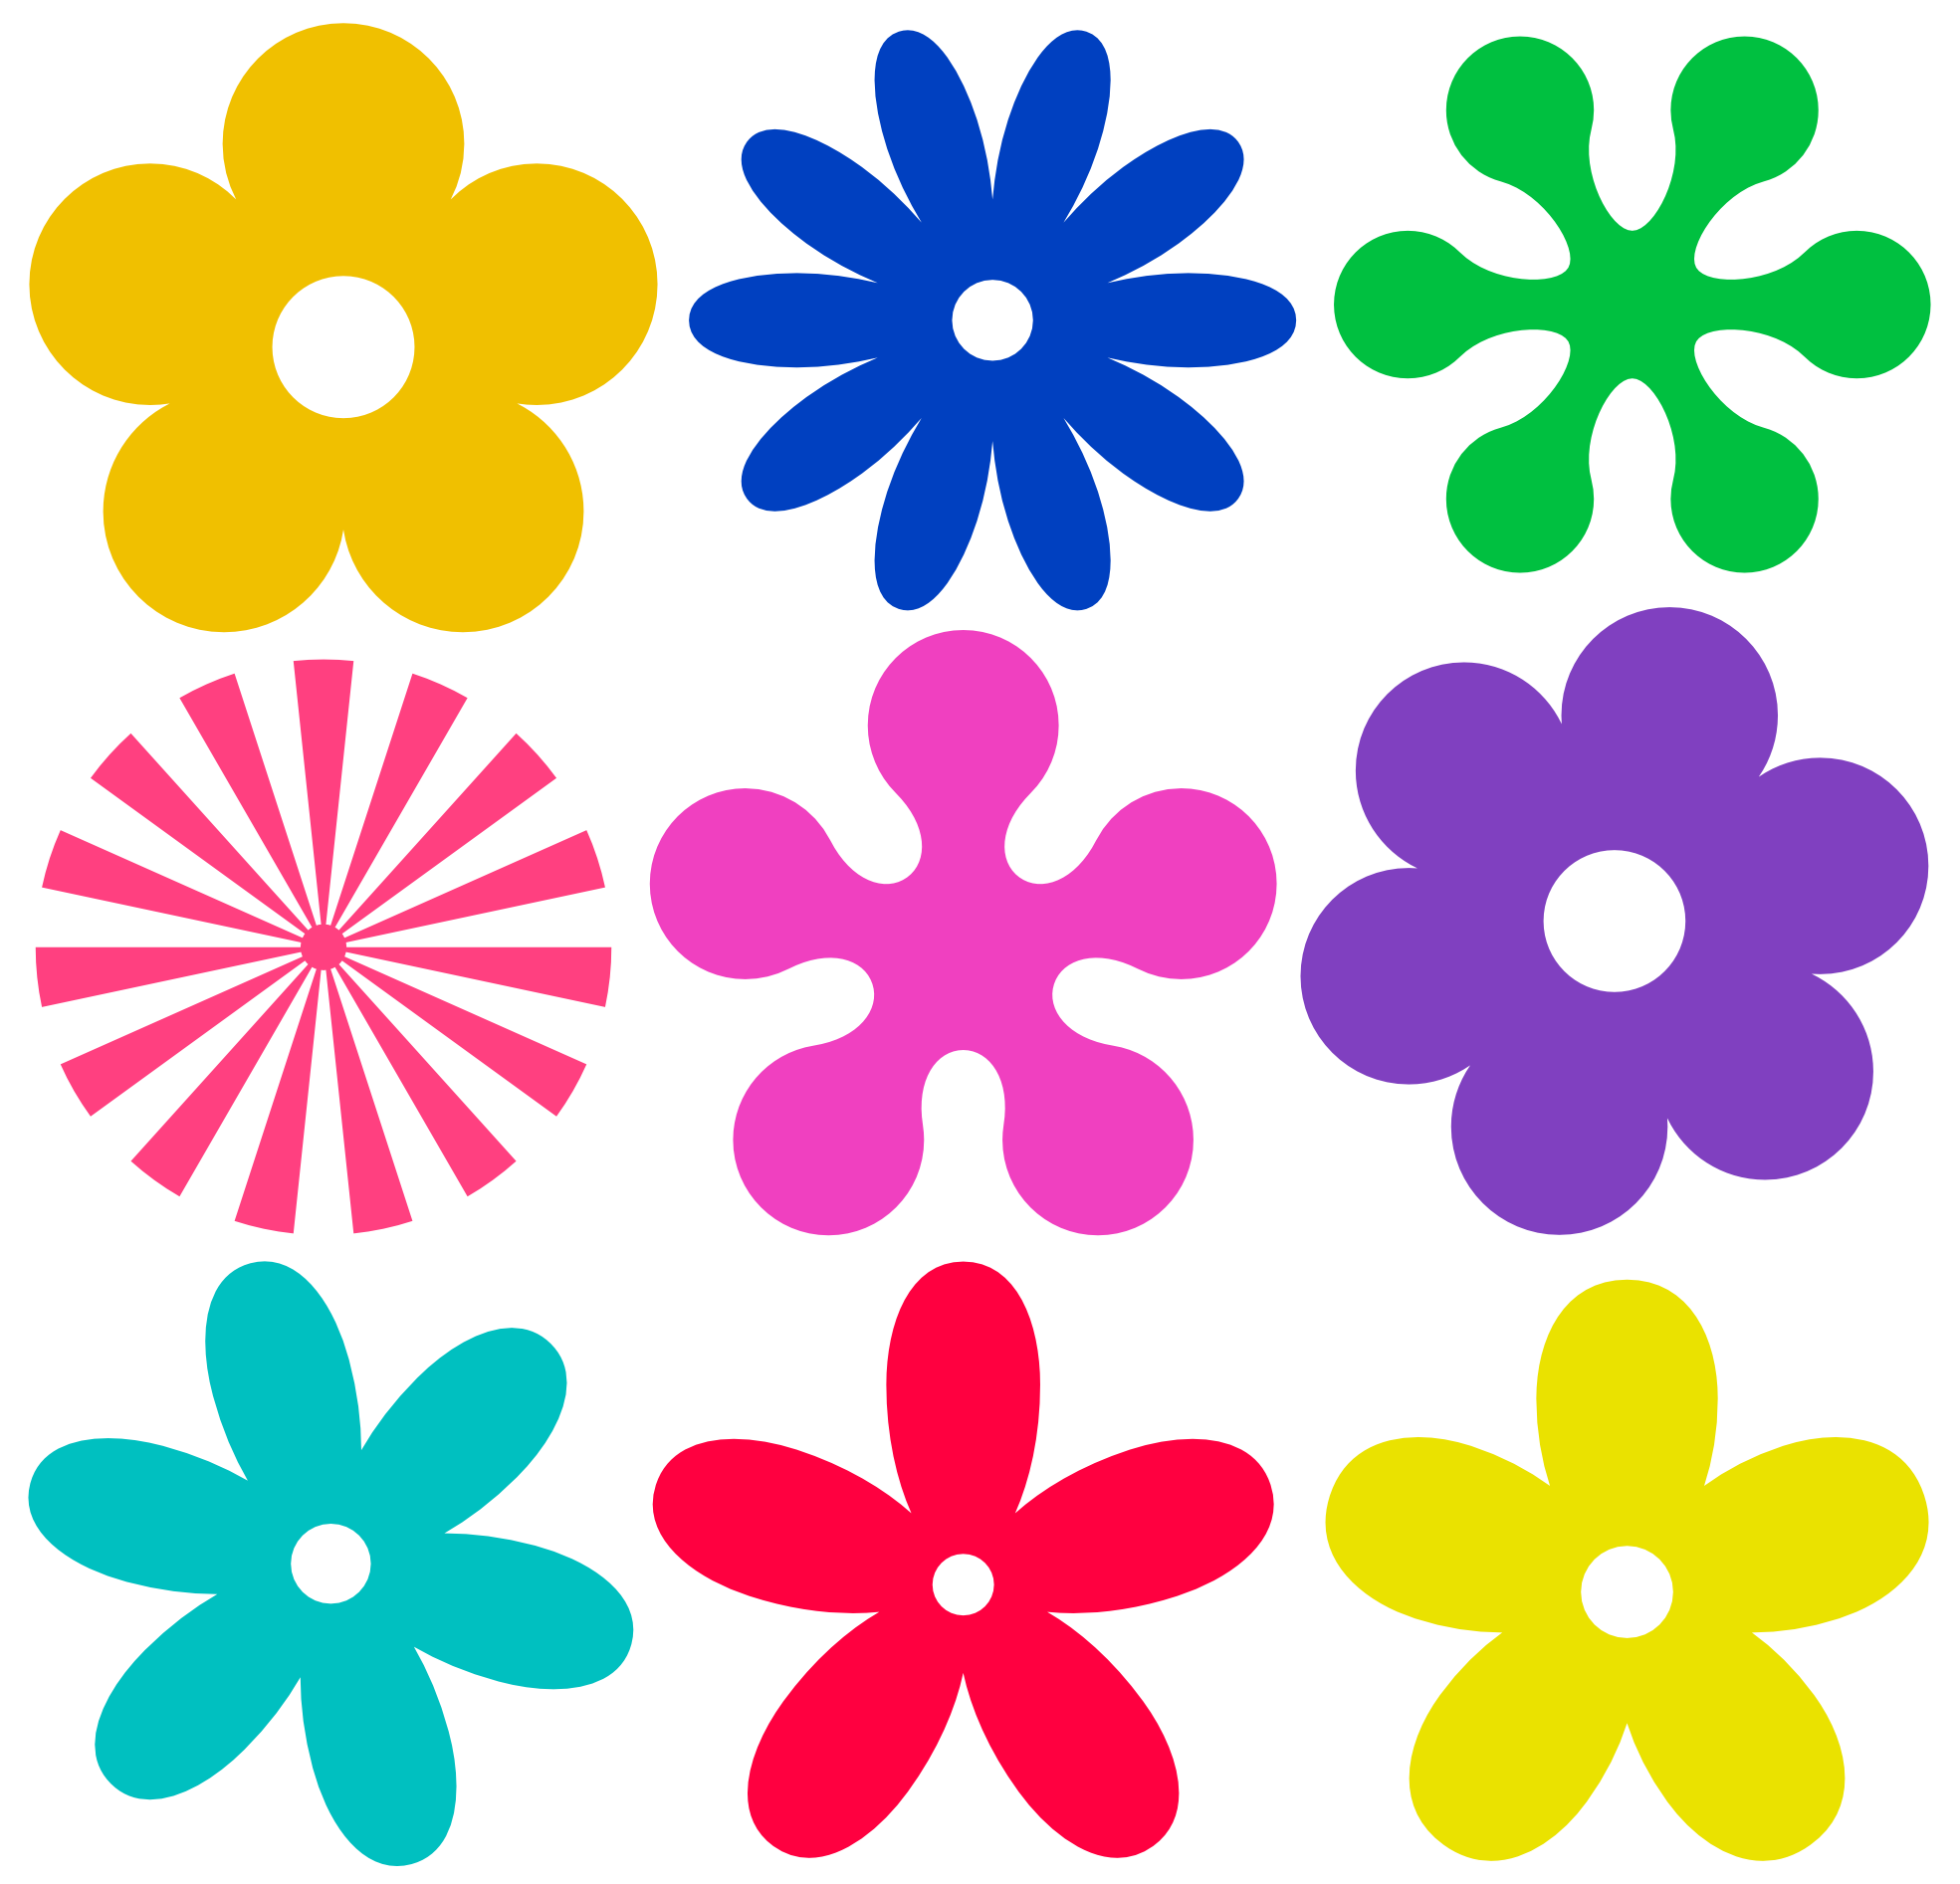 7 flowers clipart